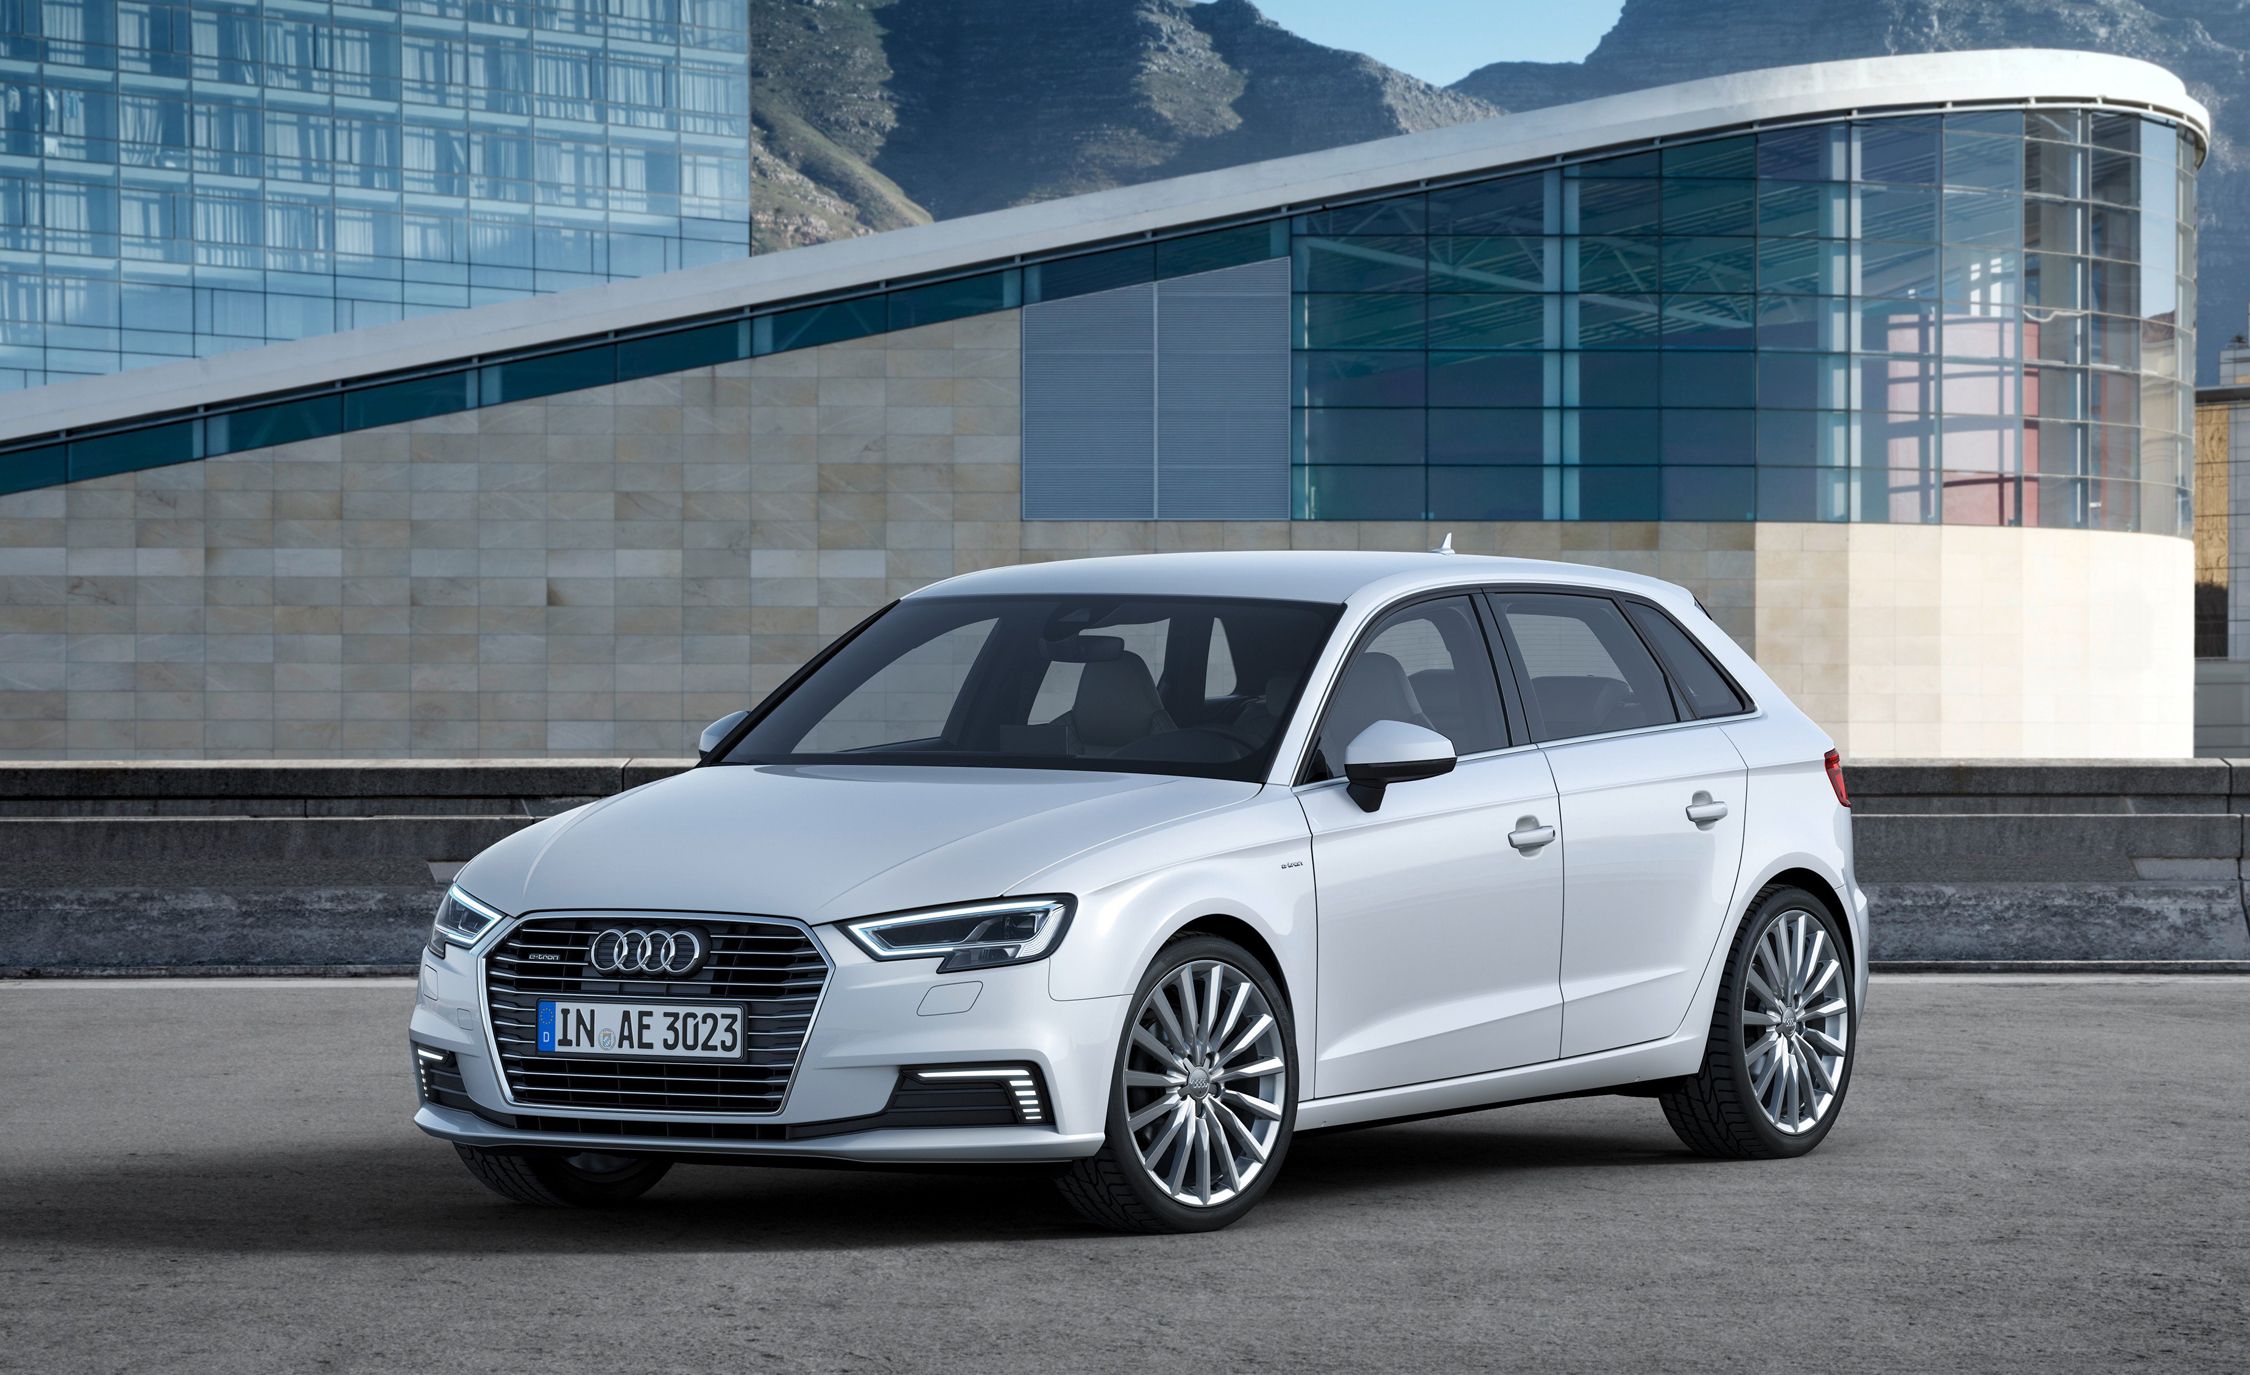 chef Beheer Ervaren persoon 2017 Audi A3 Sportback e-tron Review, Pricing, and Specs